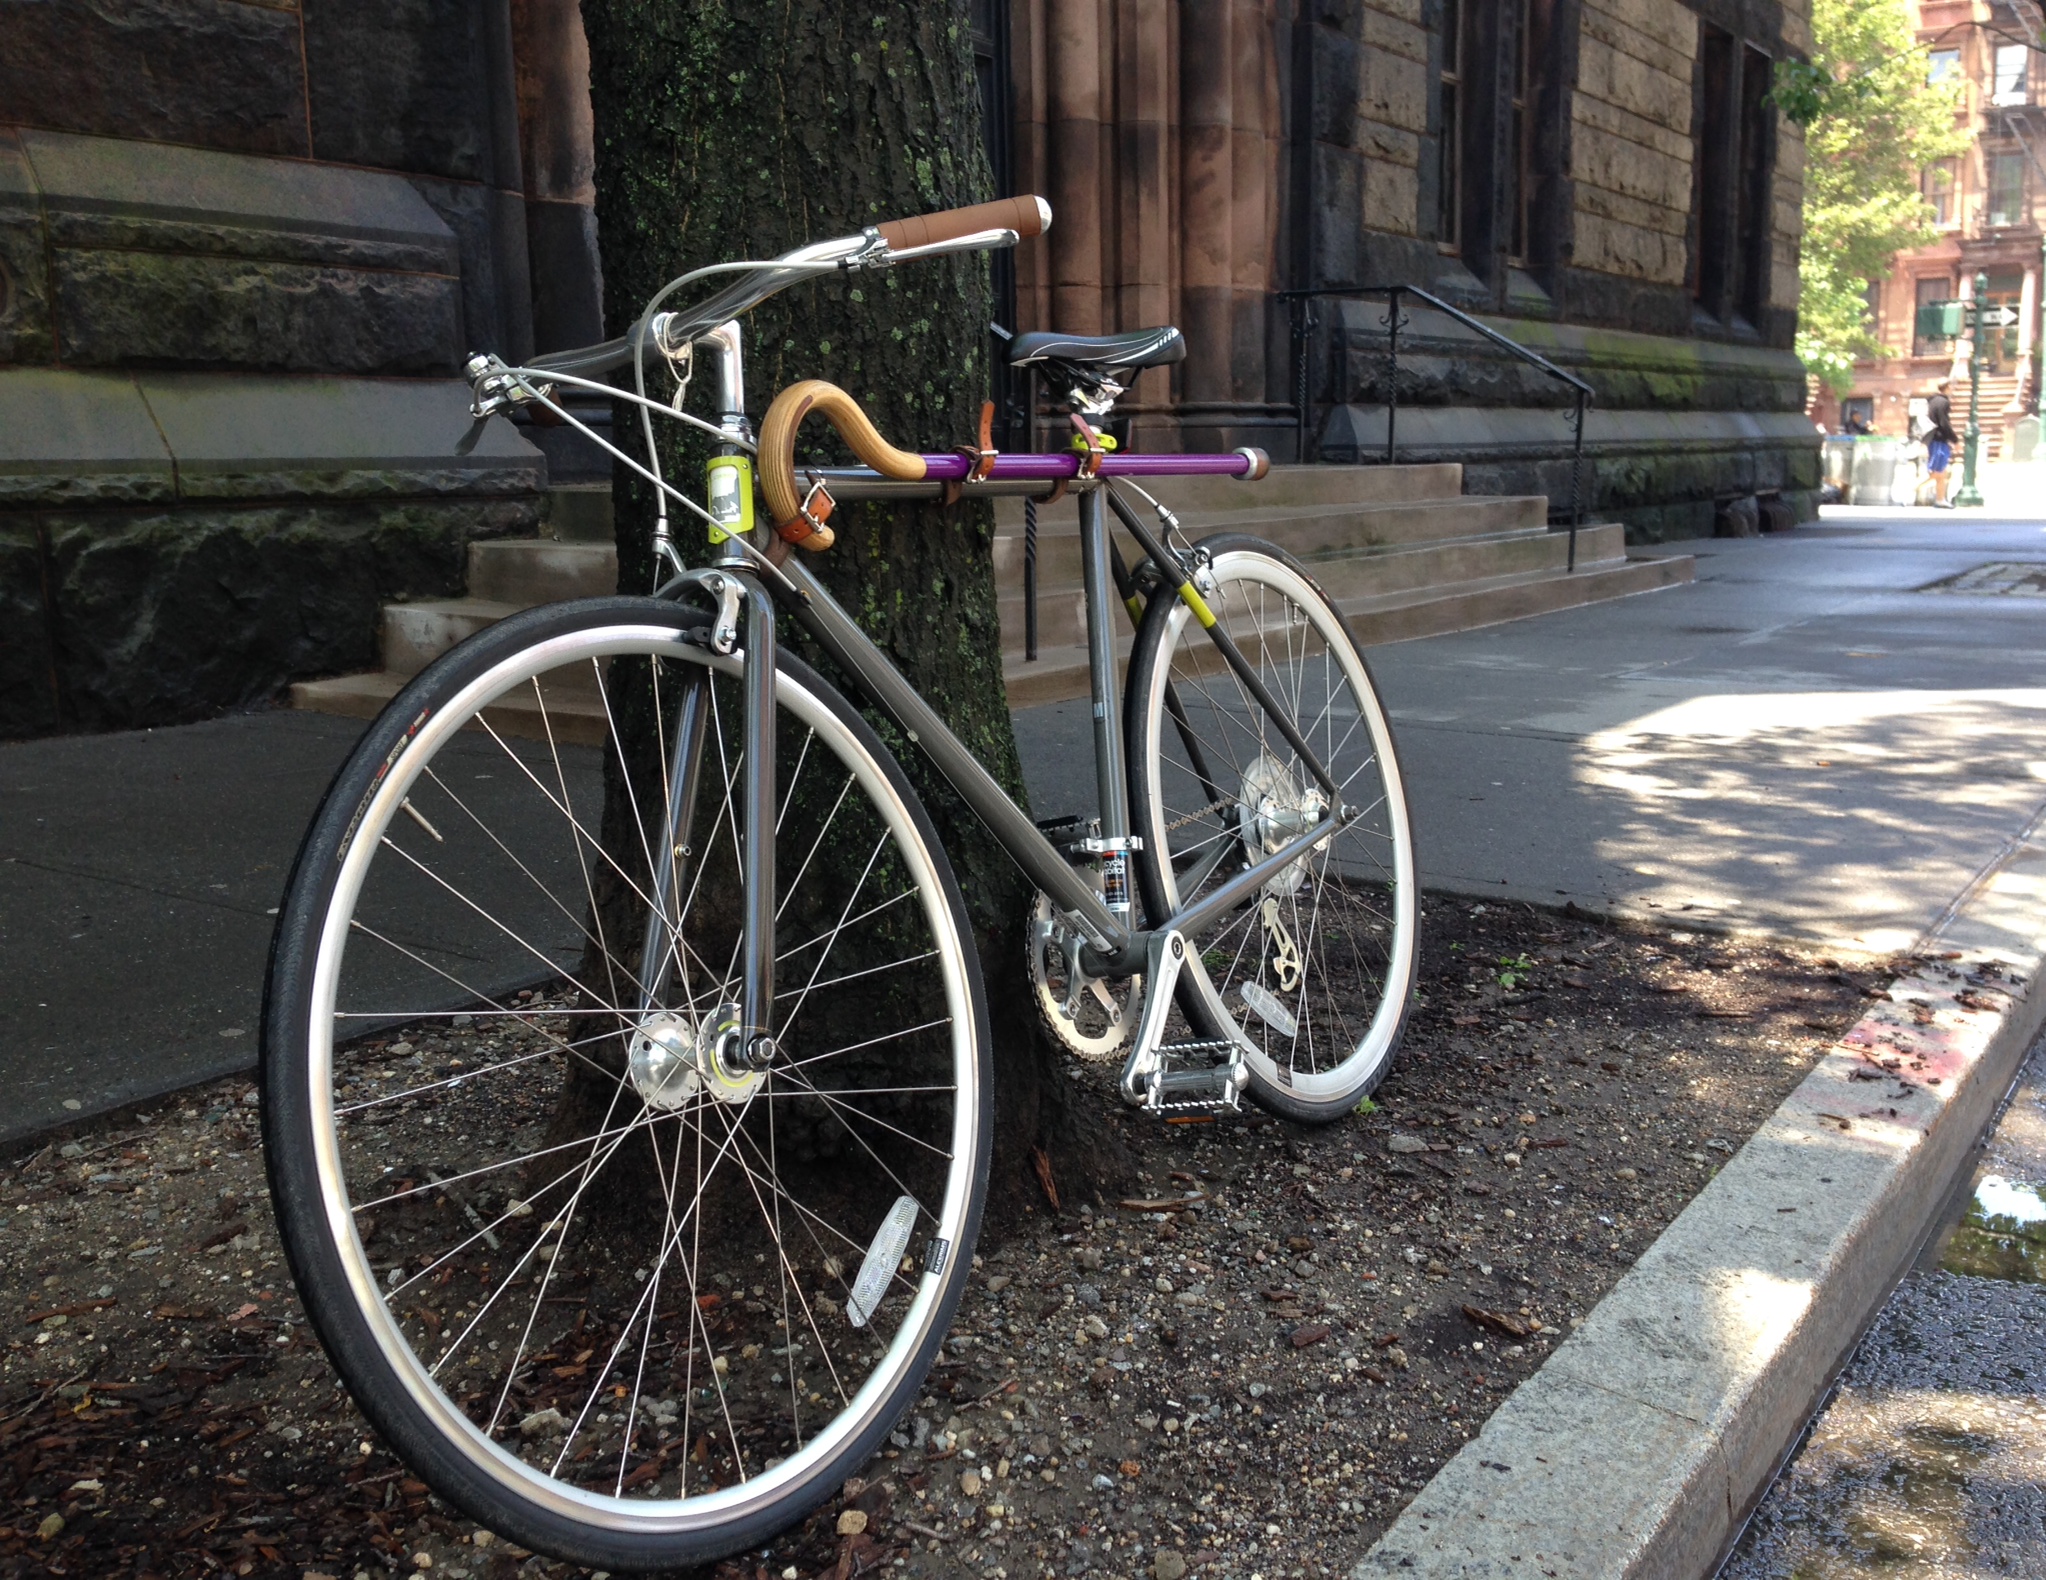 A wide shot of the bike with purple cane attached, leaning against a tree in New York.